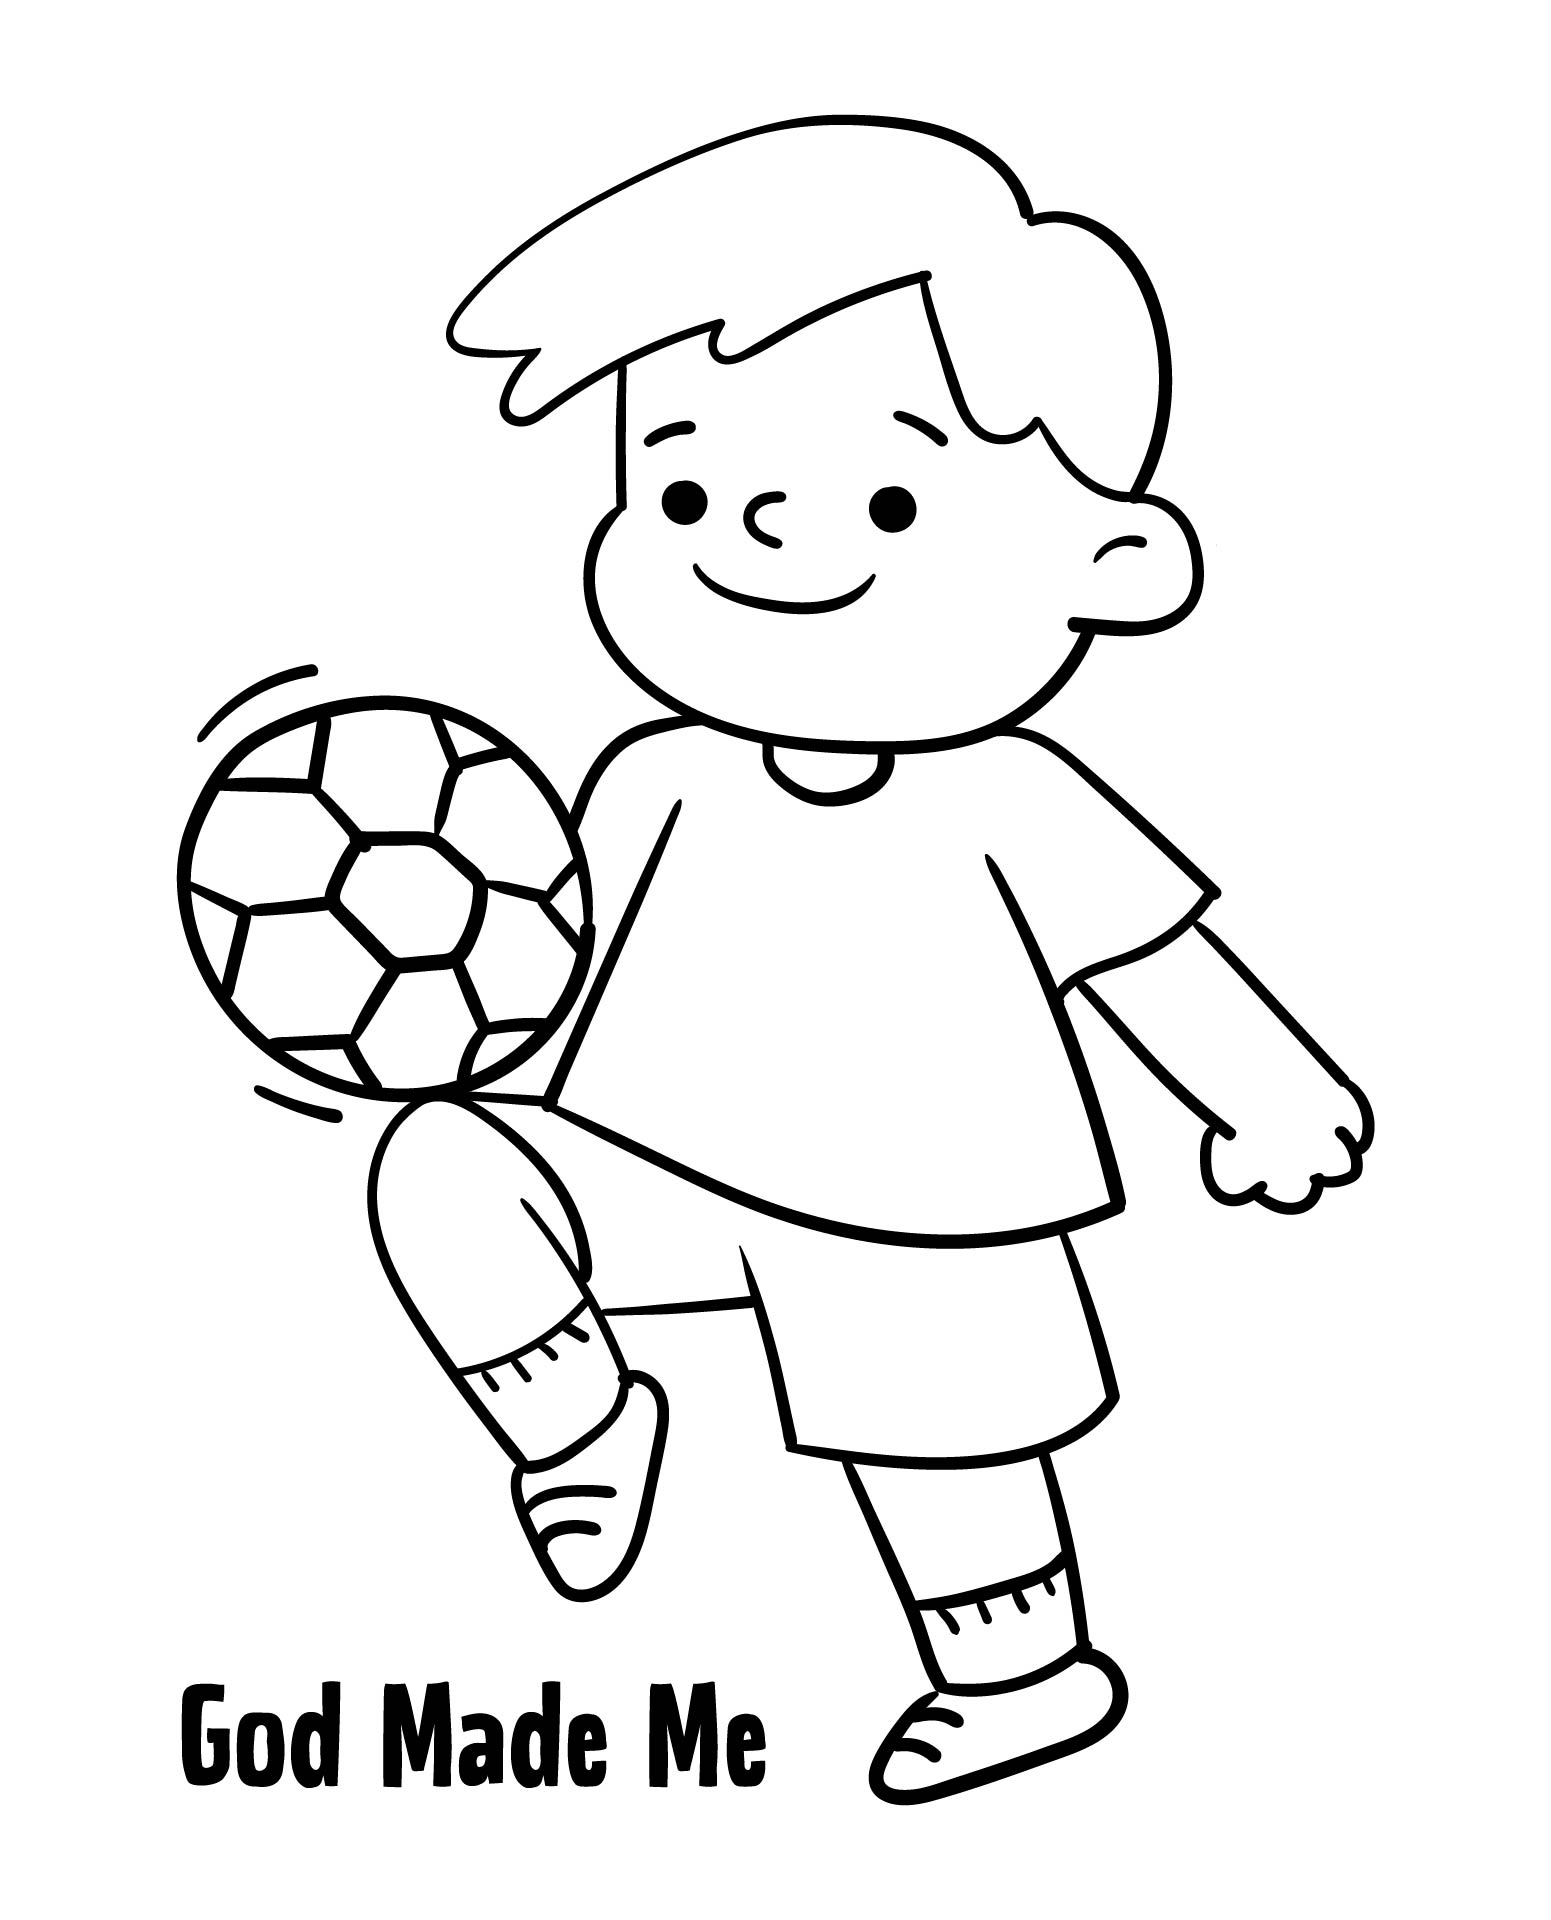 God Made Me Coloring Pages